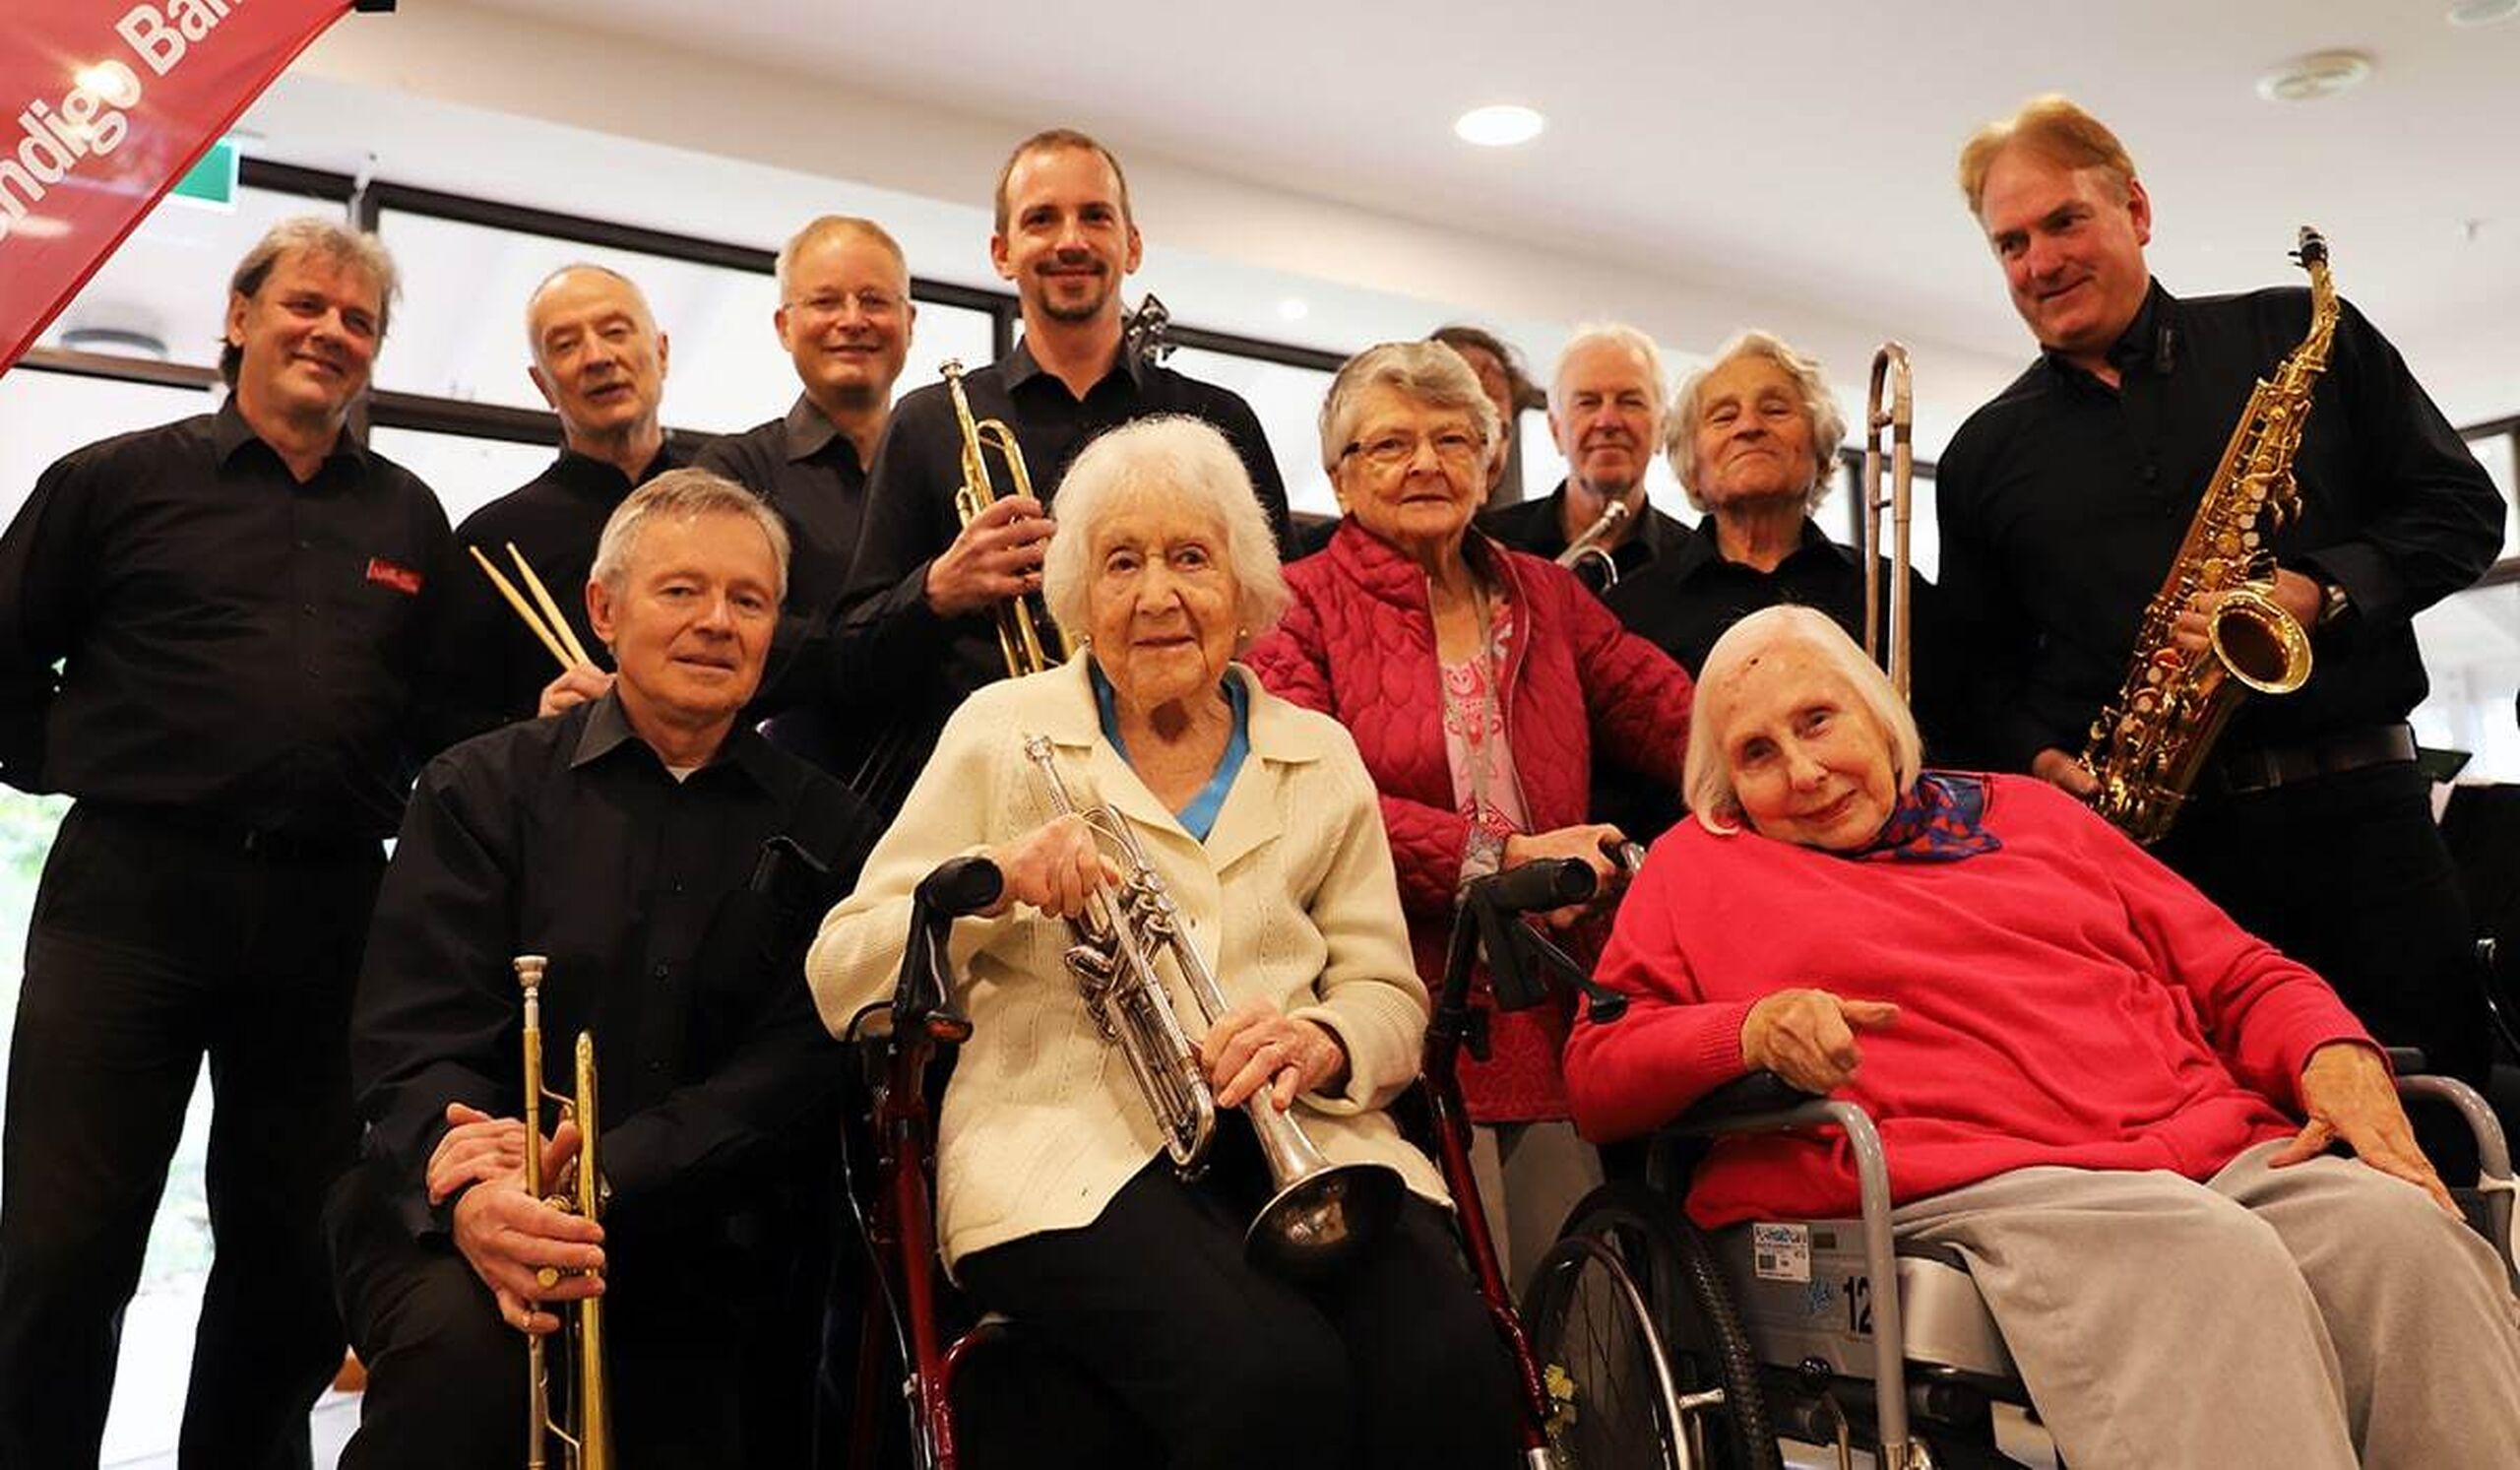 Jazz goes live at Baptistcare Yallambee Residential Aged Care in Mundaring